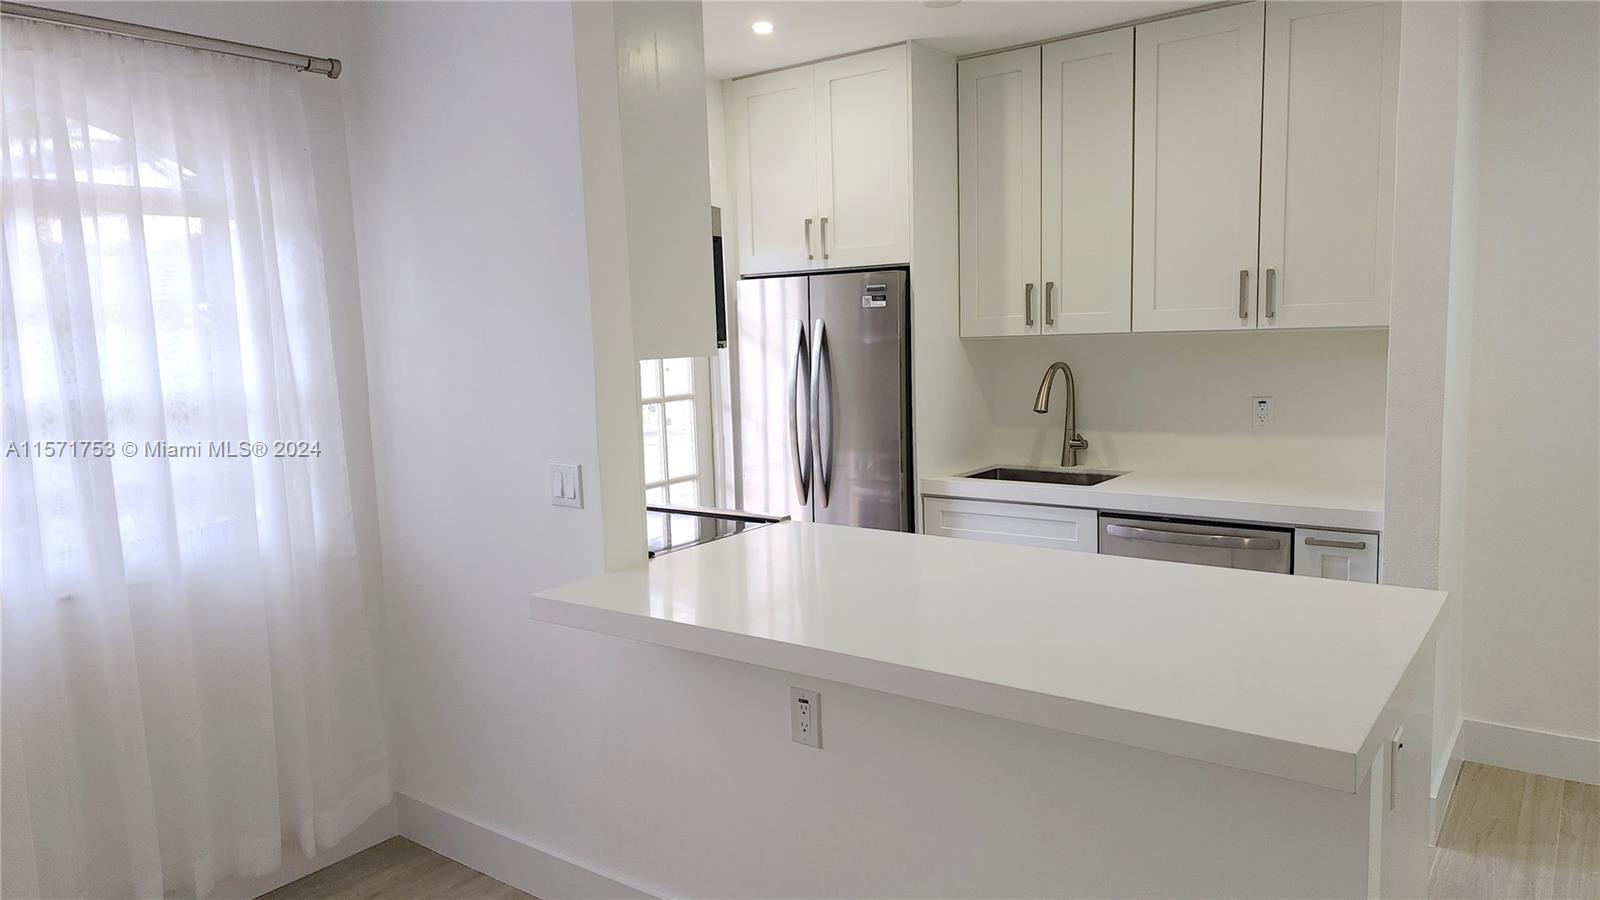 a kitchen with stainless steel appliances a refrigerator and white cabinets